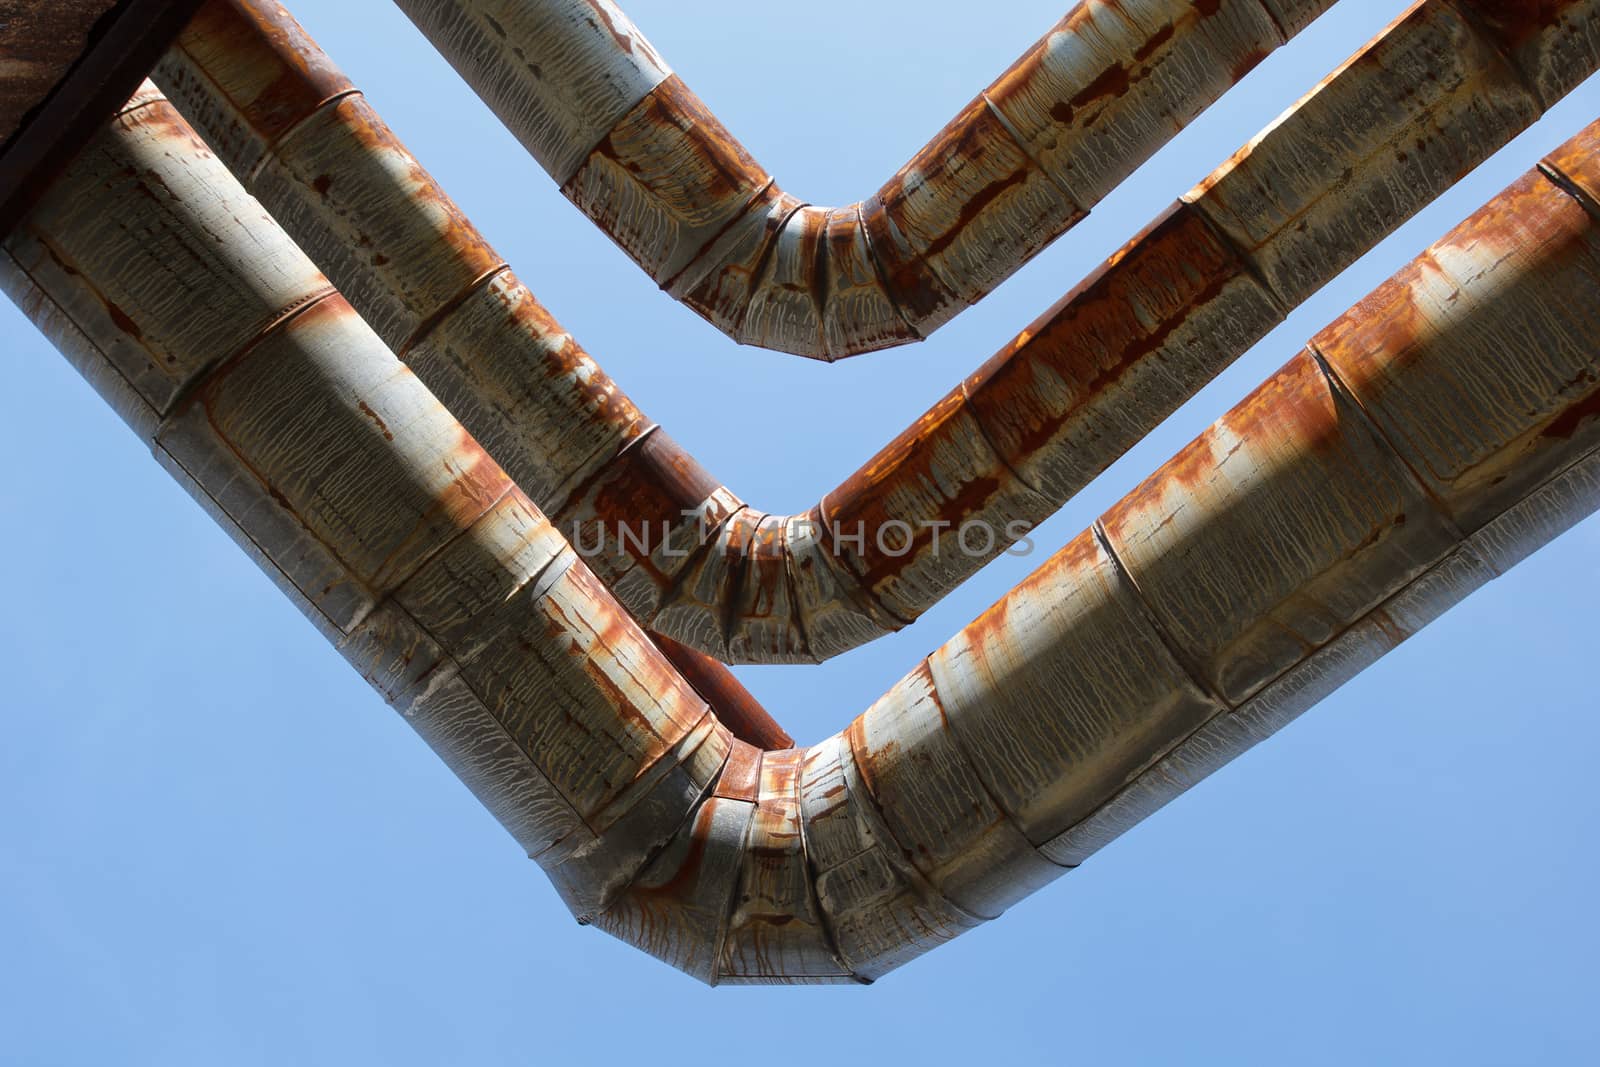 old rusty pipes against a blue sky